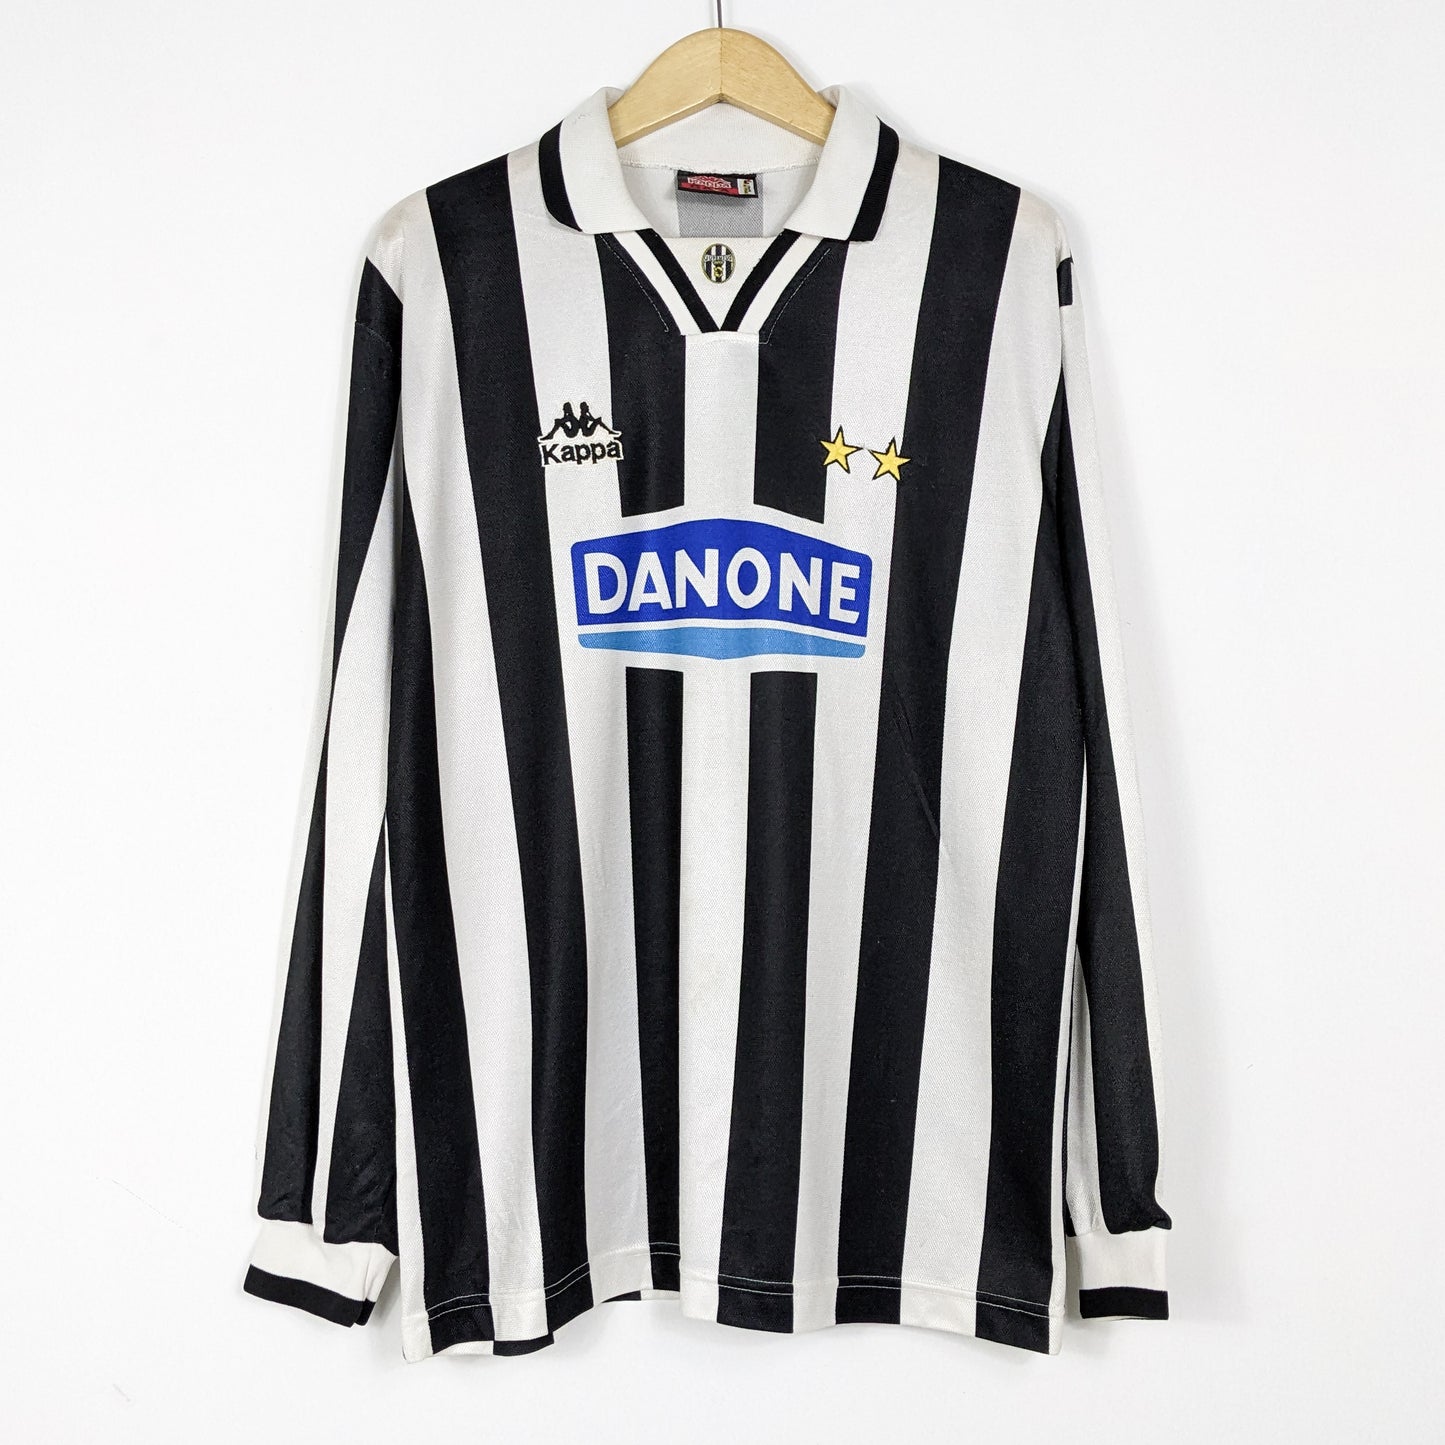 Authentic Juventus 1994/1995 Home Longsleeve - Baggio #10 Size L